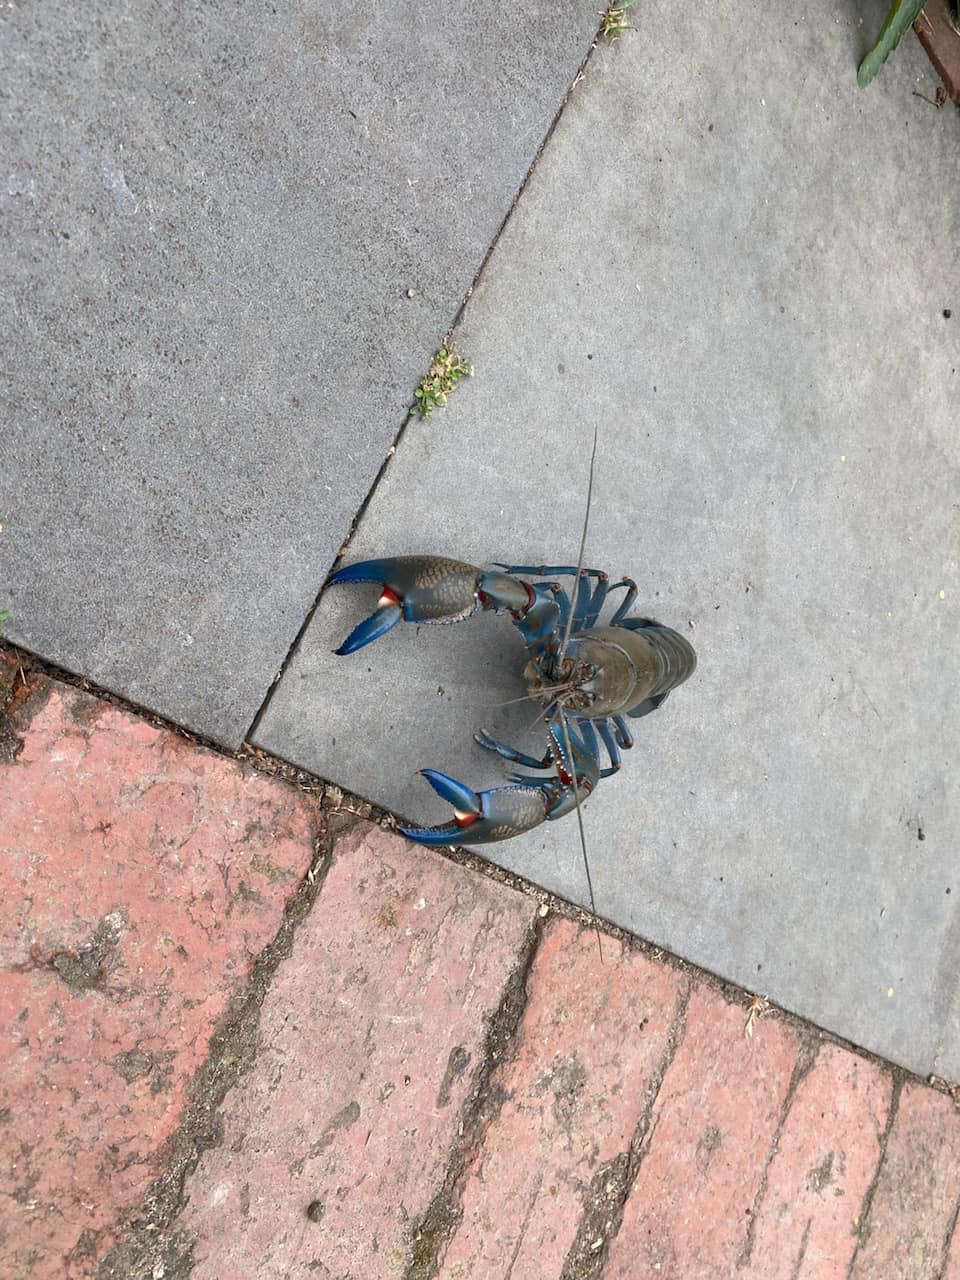 A large, pristine yabby spotted on concrete pavers in a Melbourne front yard.